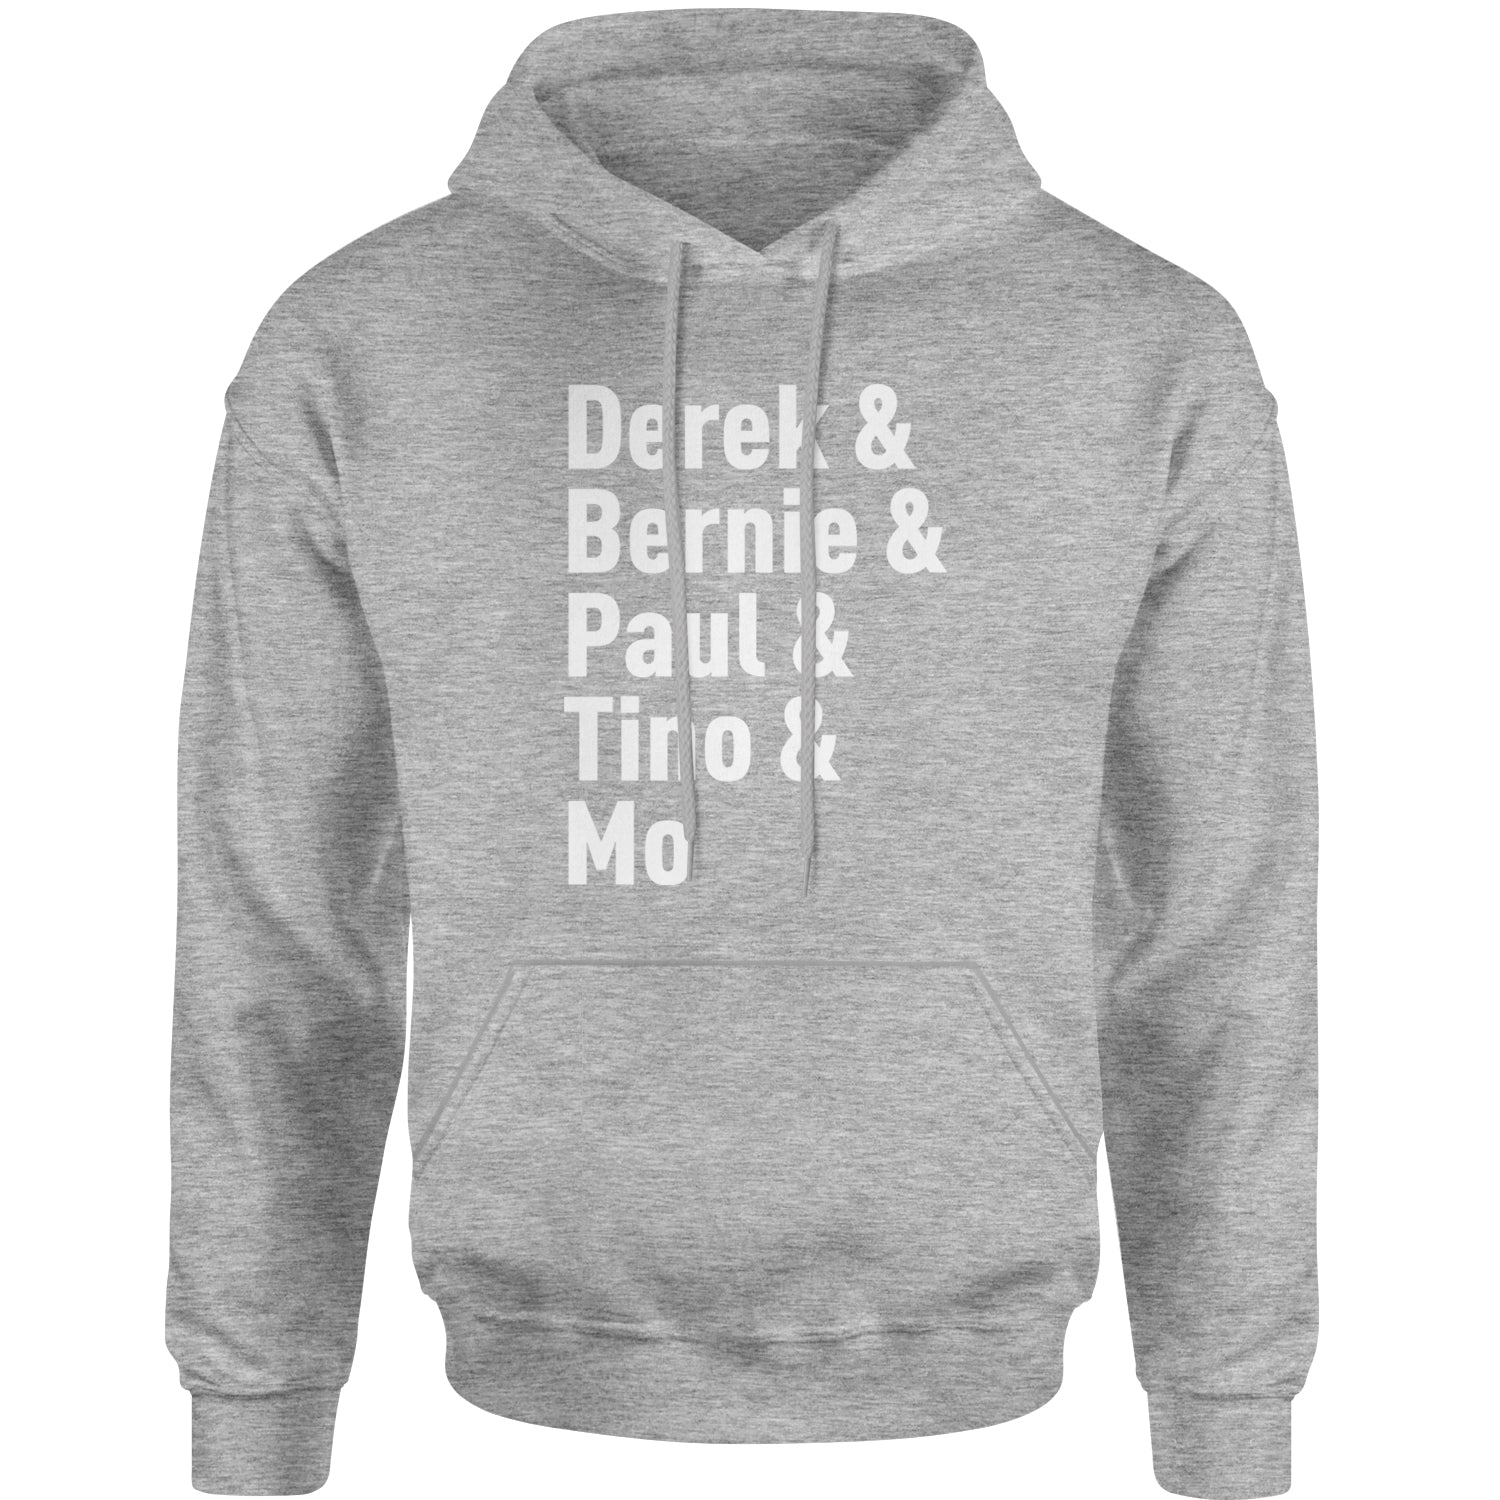 Derek and Bernie and Paul and Tino and Mo Adult Hoodie Sweatshirt baseball, comes, here, judge, the by Expression Tees